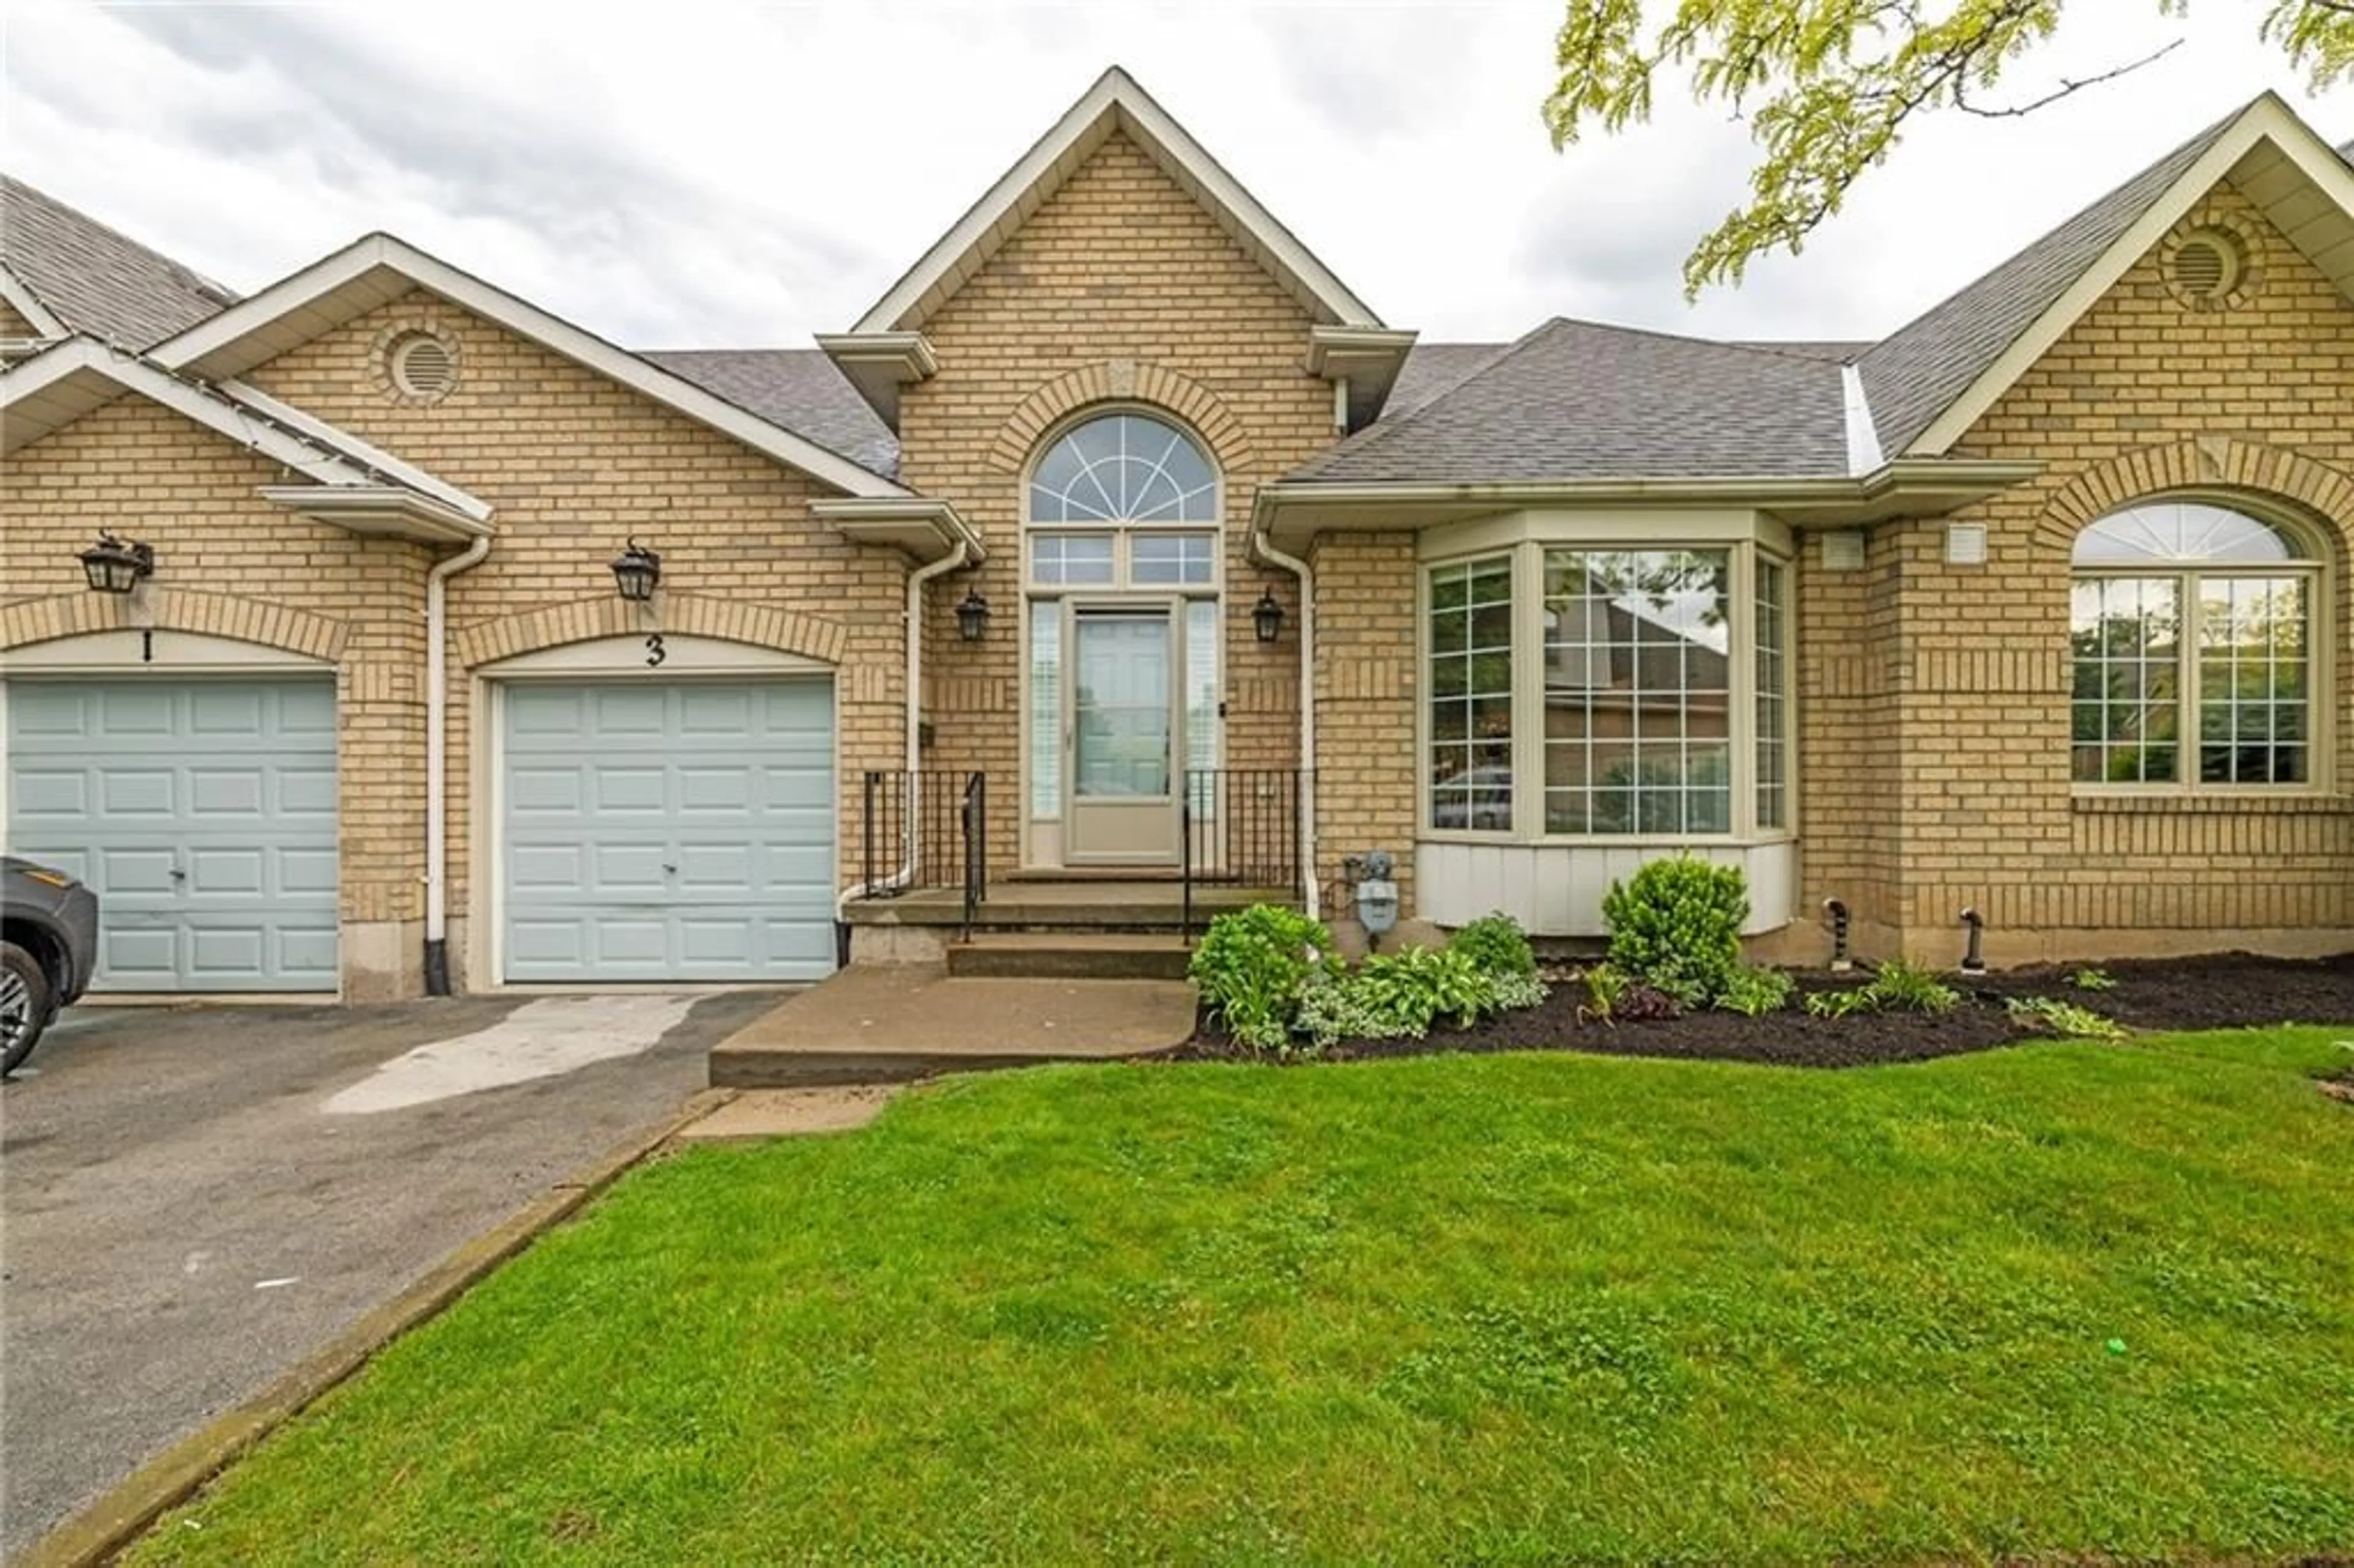 Frontside or backside of a home for 20 RED HAVEN Dr #3, Grimsby Ontario L3M 5K1